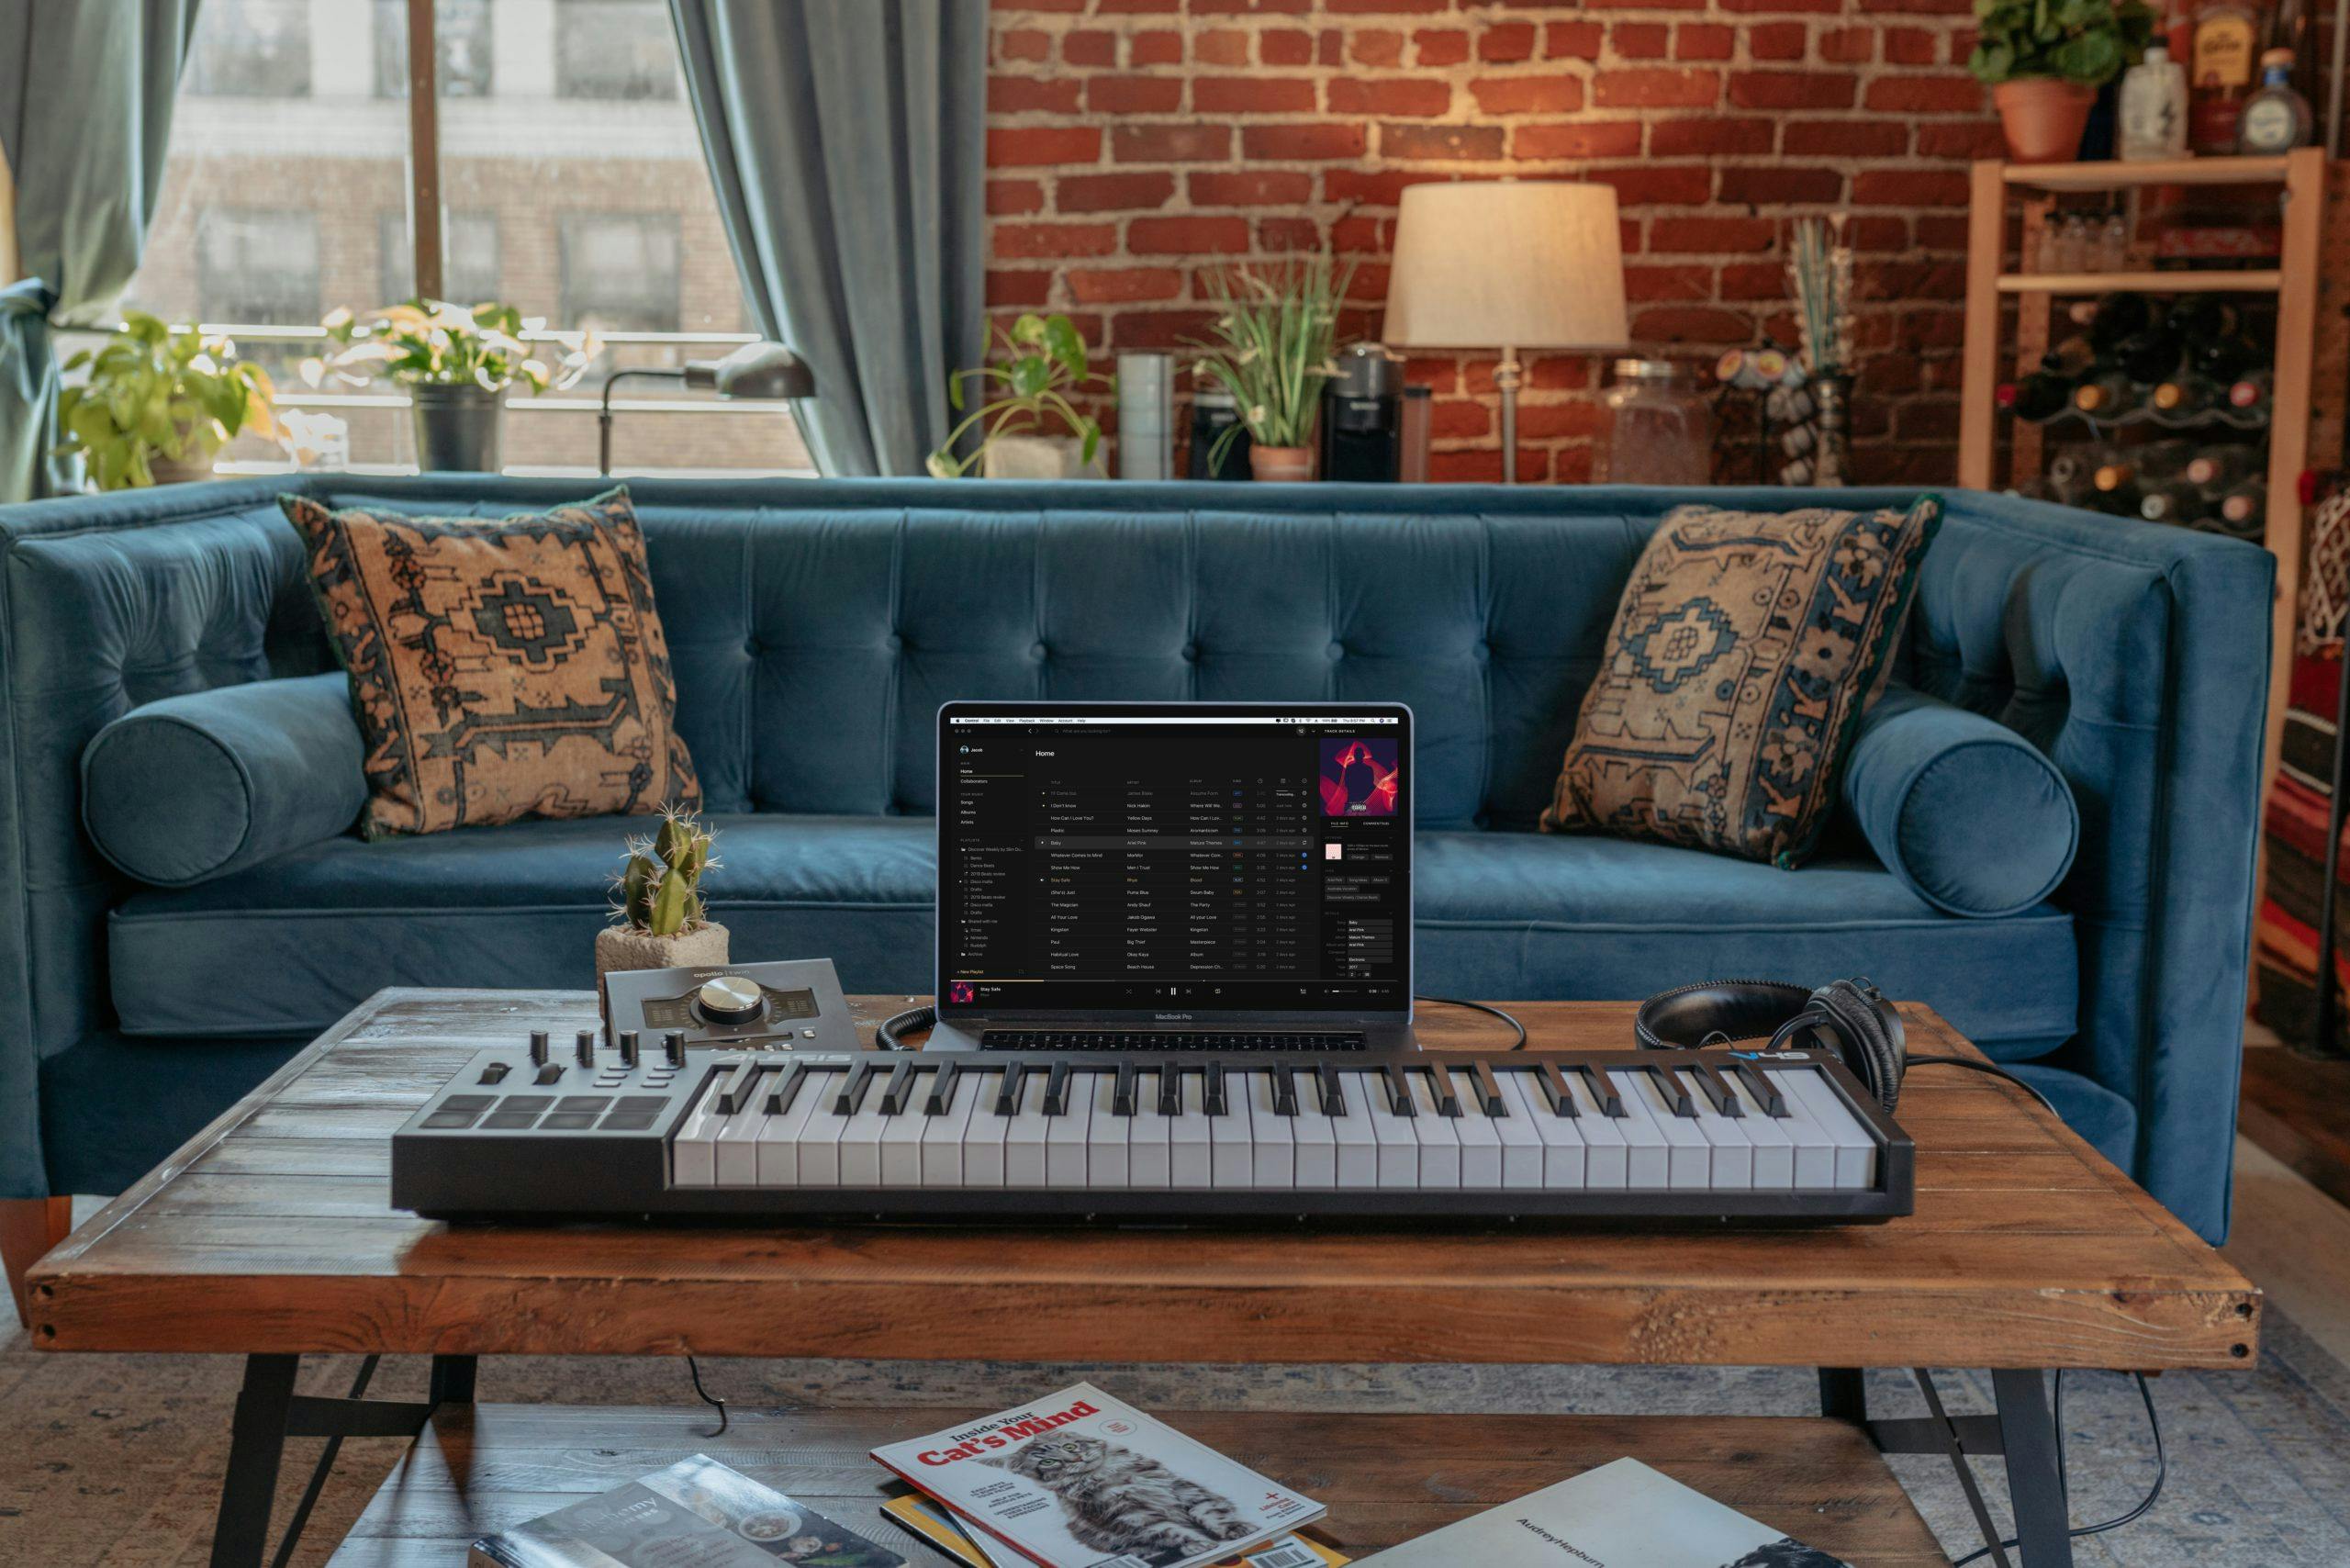 How to find the best MIDI Keyboard Controller 